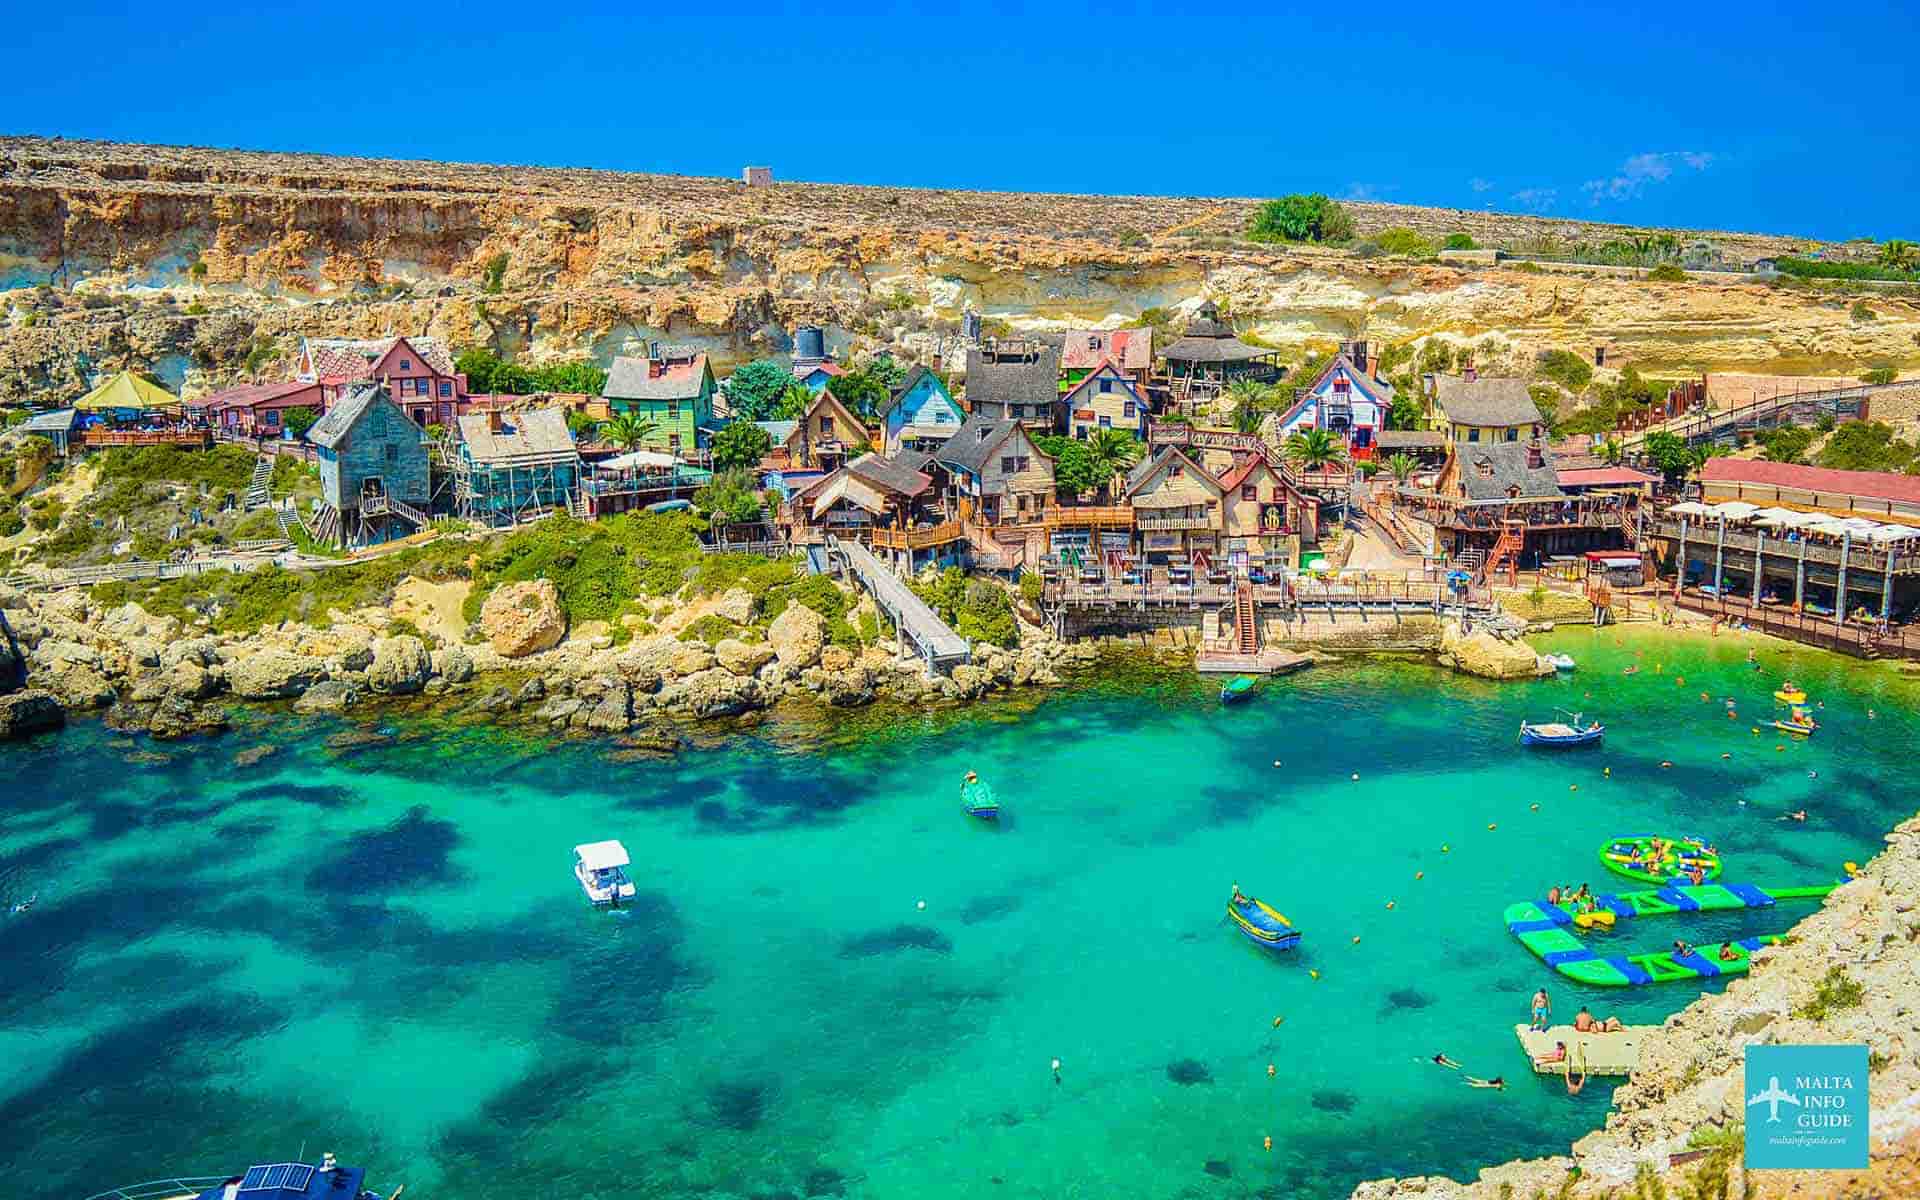 Malta is home to amazing attractions where we have summed up the top tourist attractions in Malta.